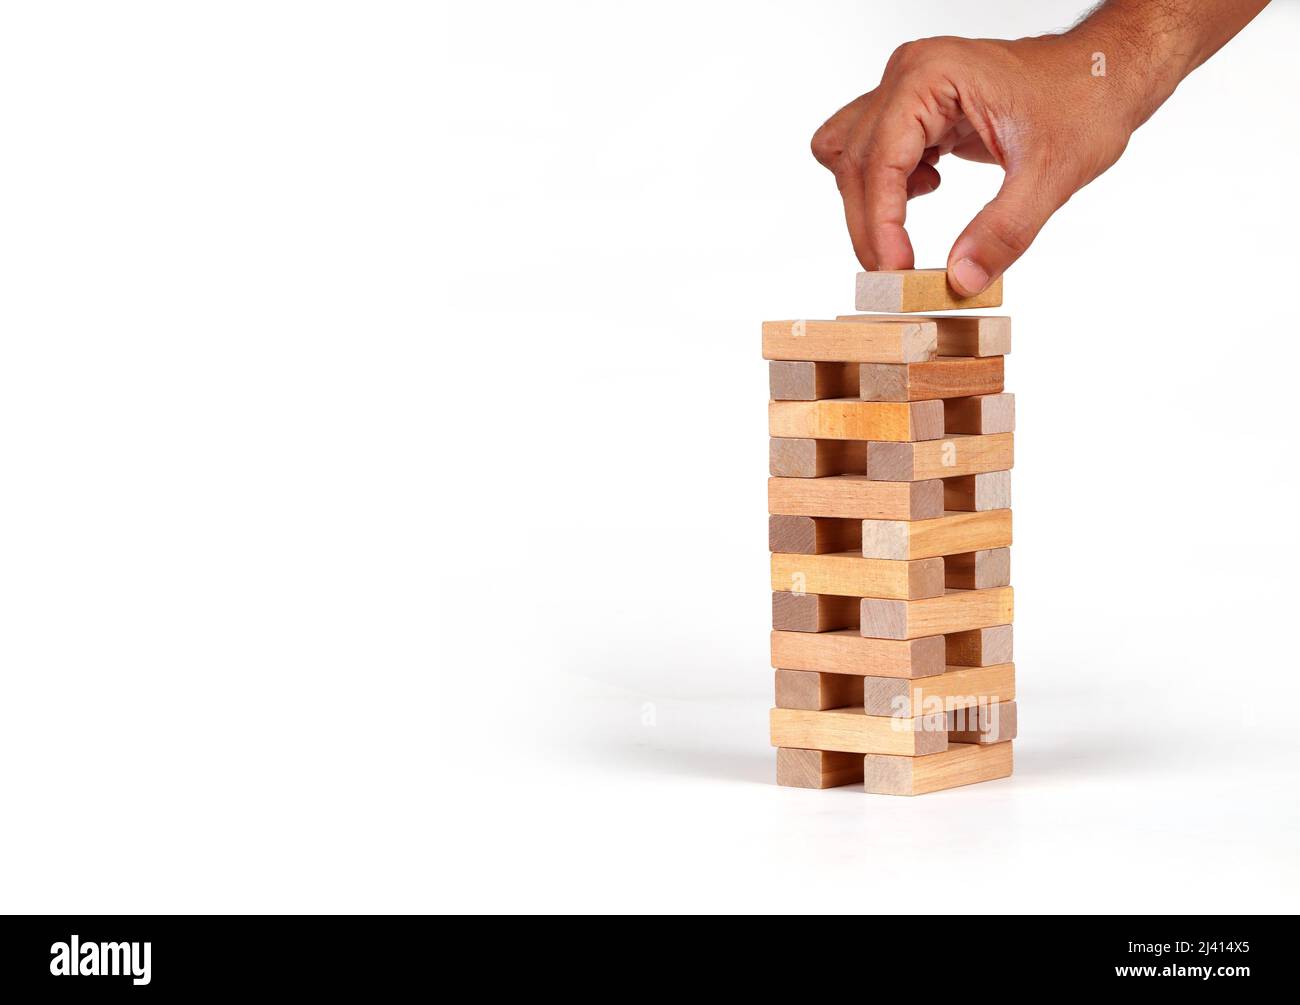 Man's hand put one block to the tower stack from wooden blocks toy with isolated background. Stock Photo